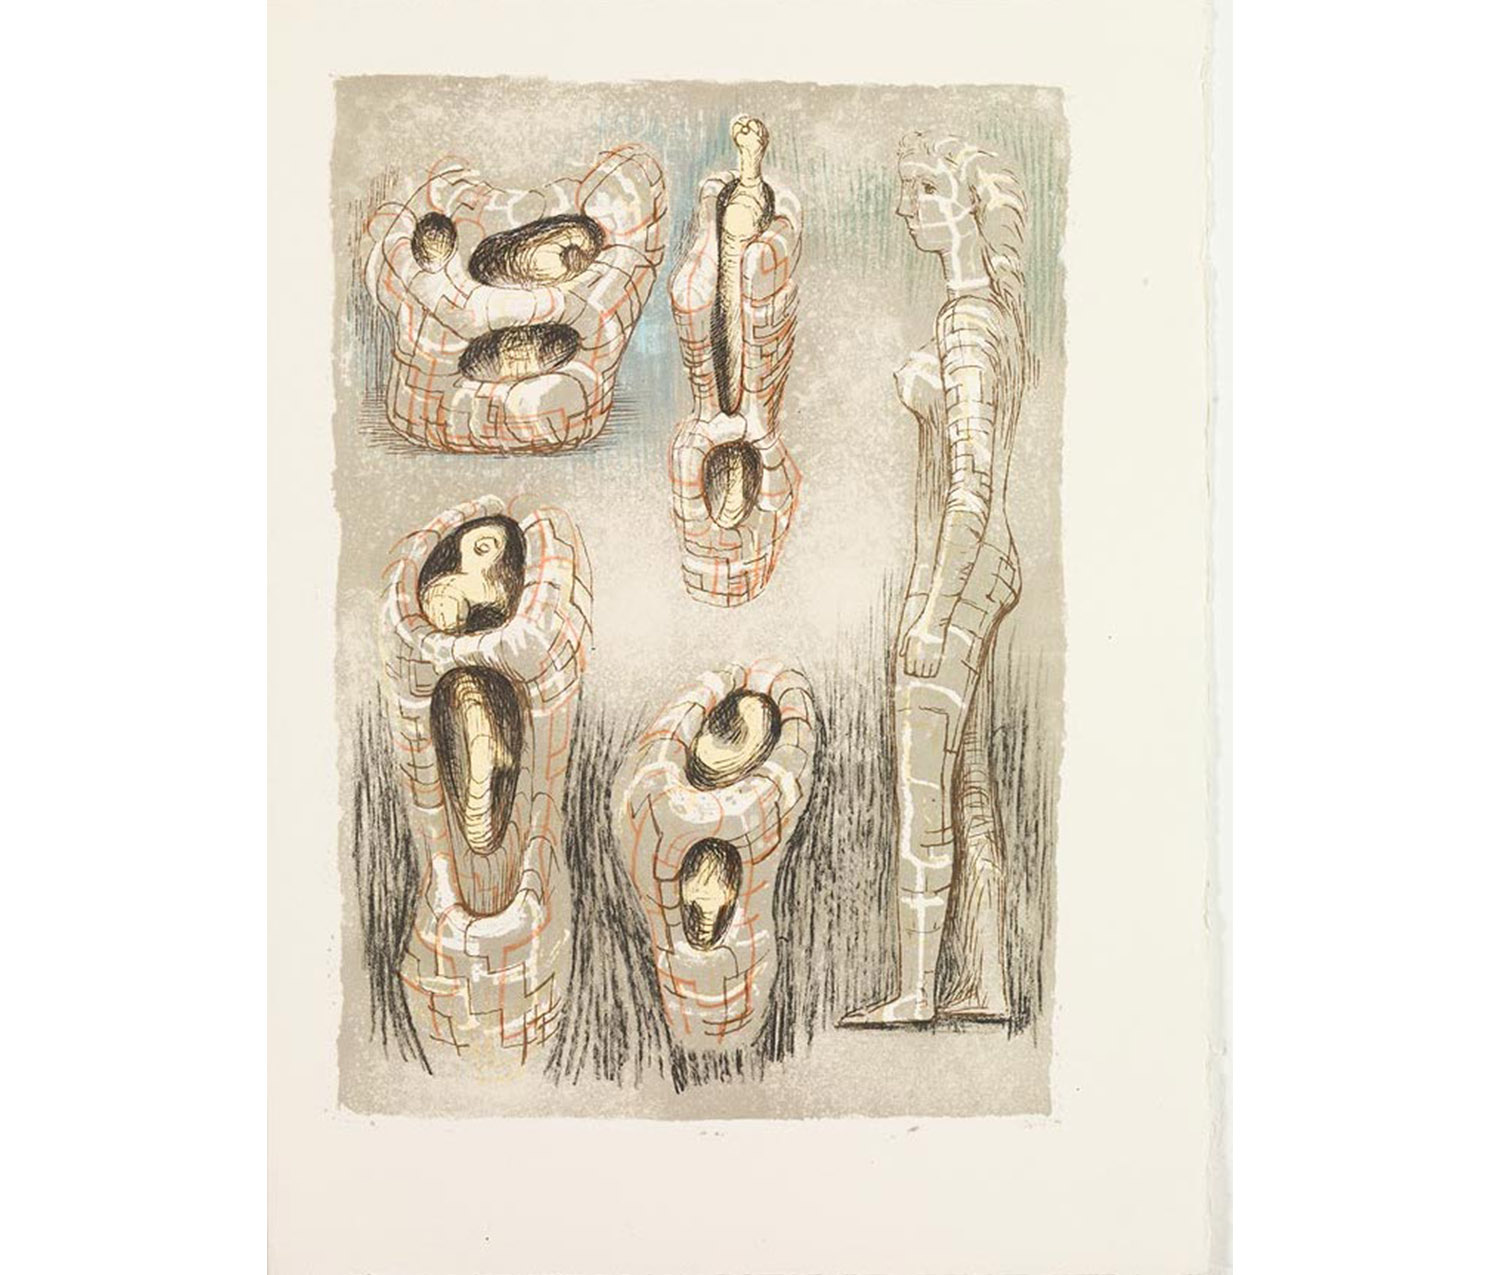 sculpture designs of abstracted figure-like shapes inside larger amorphous shapes; human figure on the right side of the page, walking toward the sculptural forms